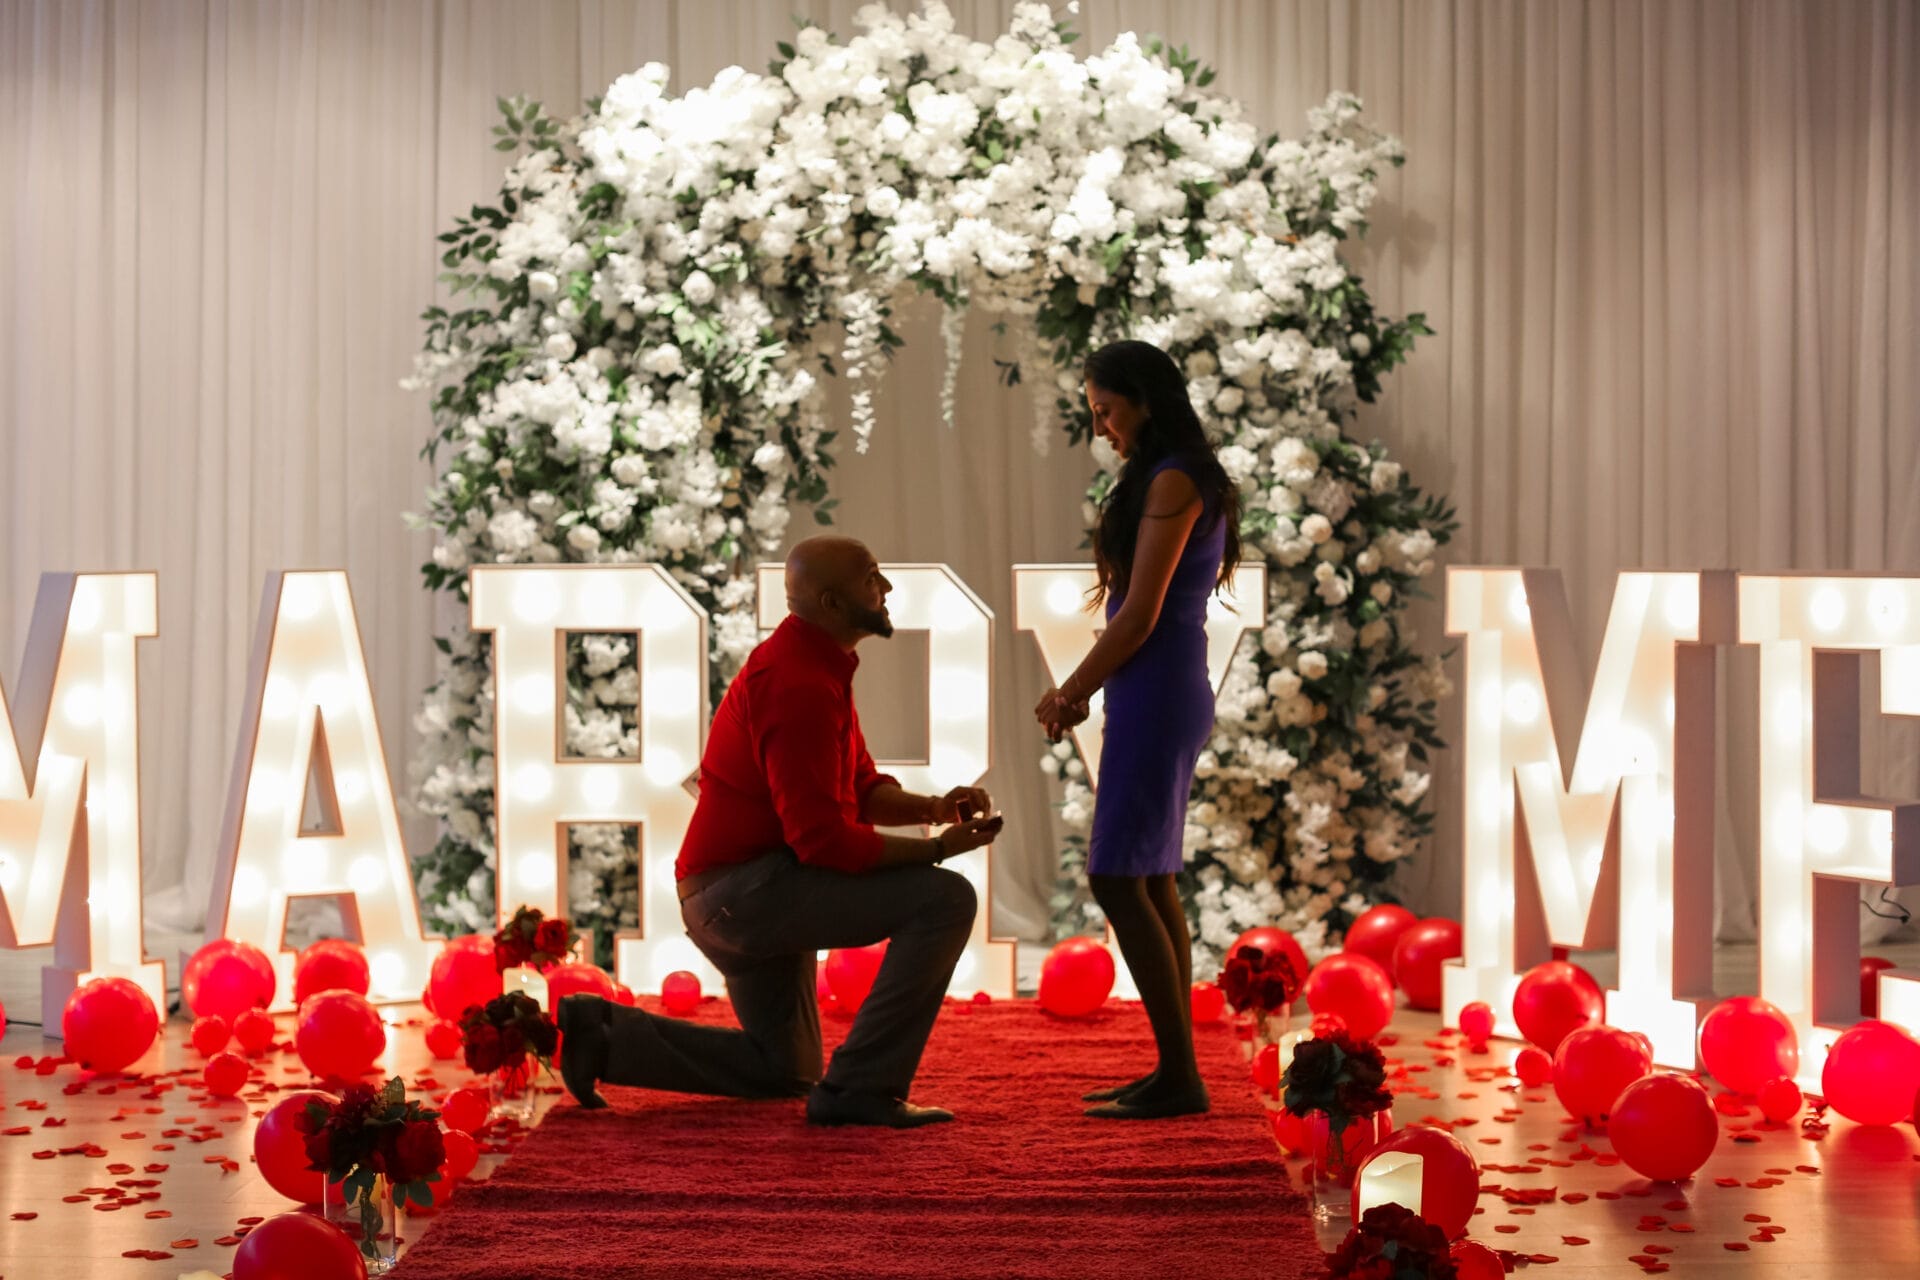 wedding proposal packages toronto north york engagement proposal venue